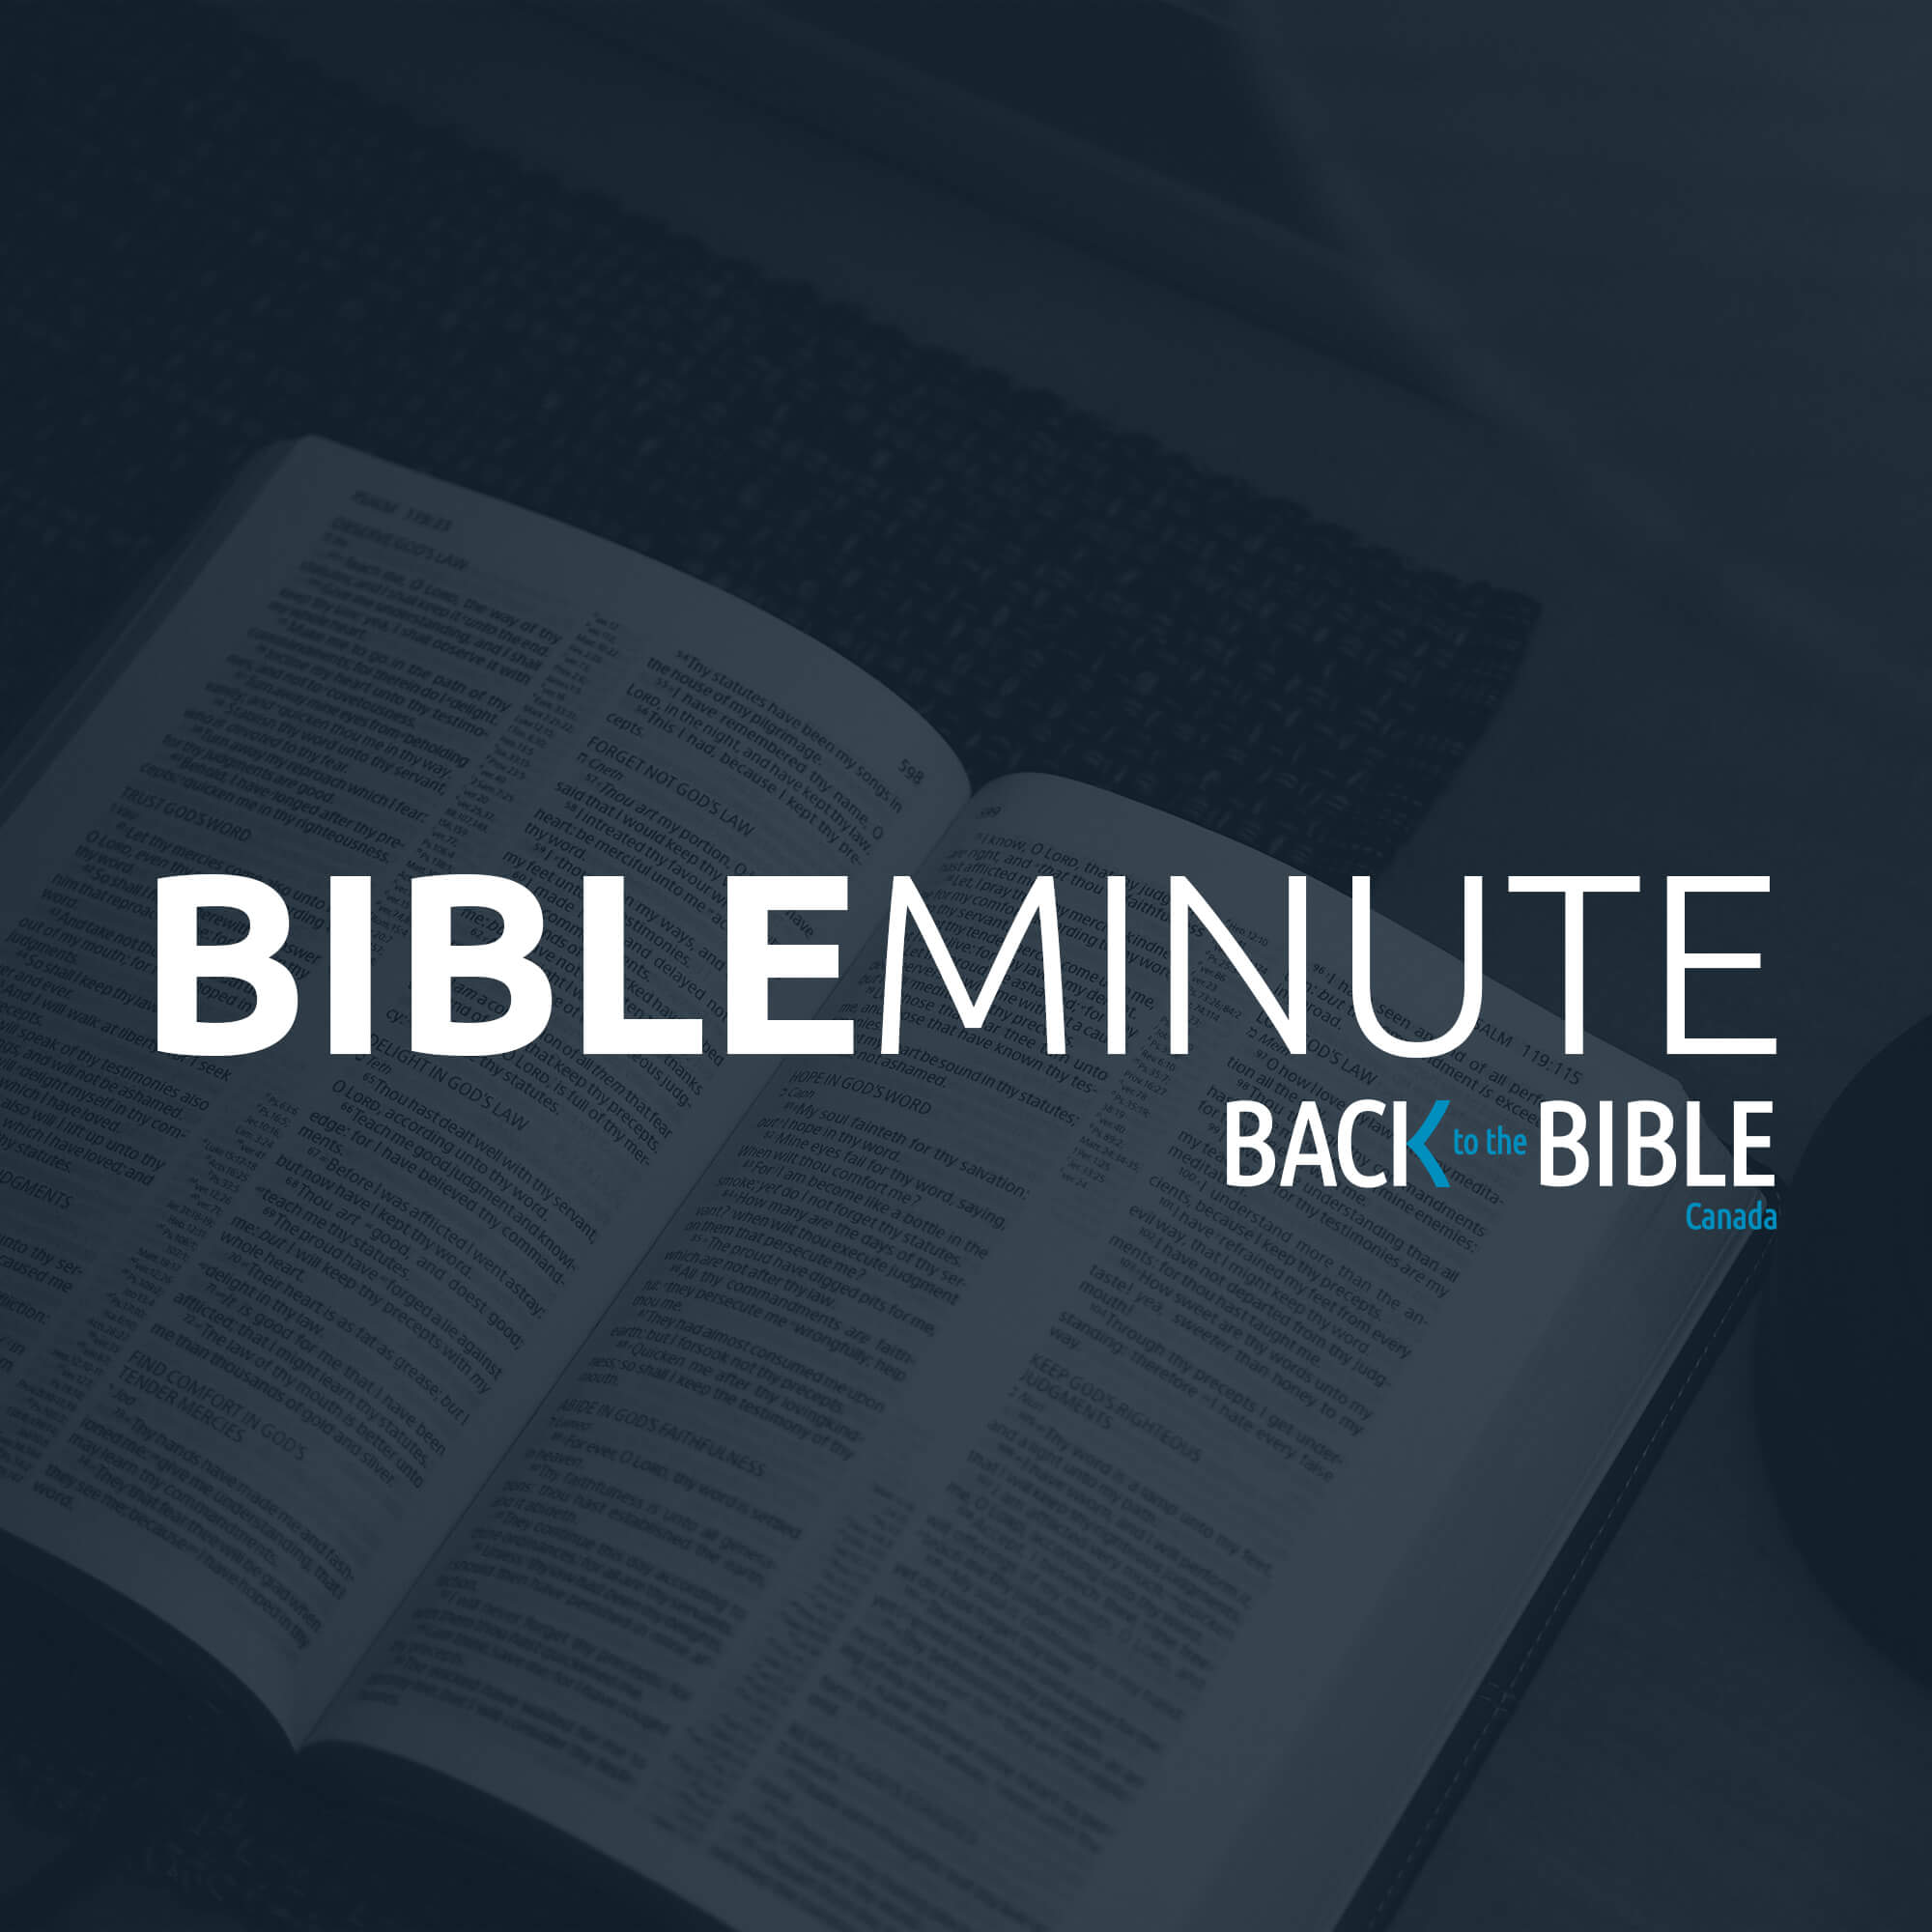 Back to the Bible Canada's Bible Minute